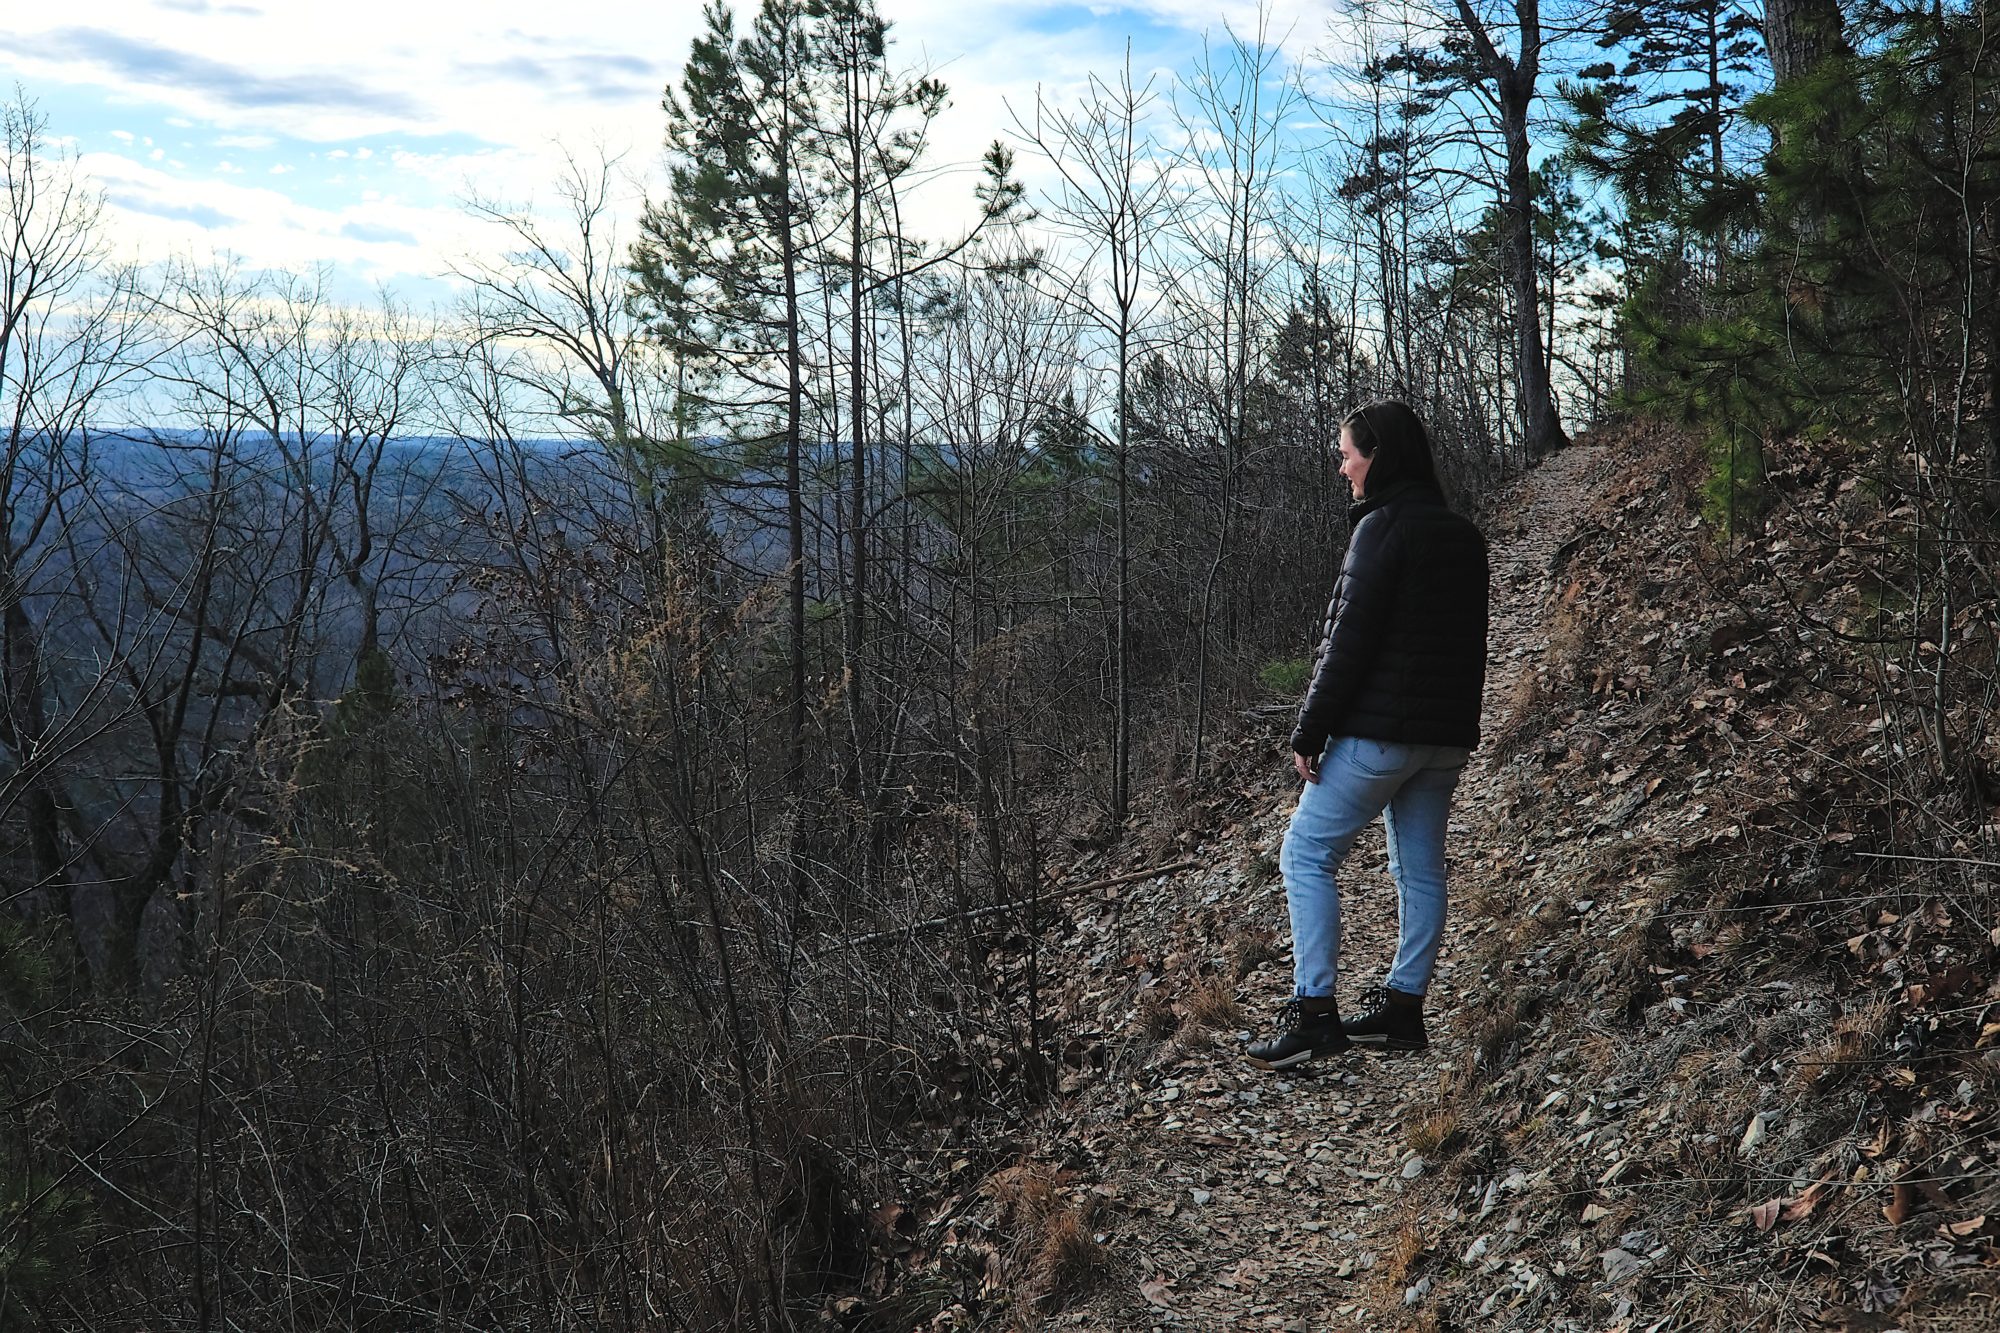 Alyssa walks on the trail at Morrow Mountain State Park